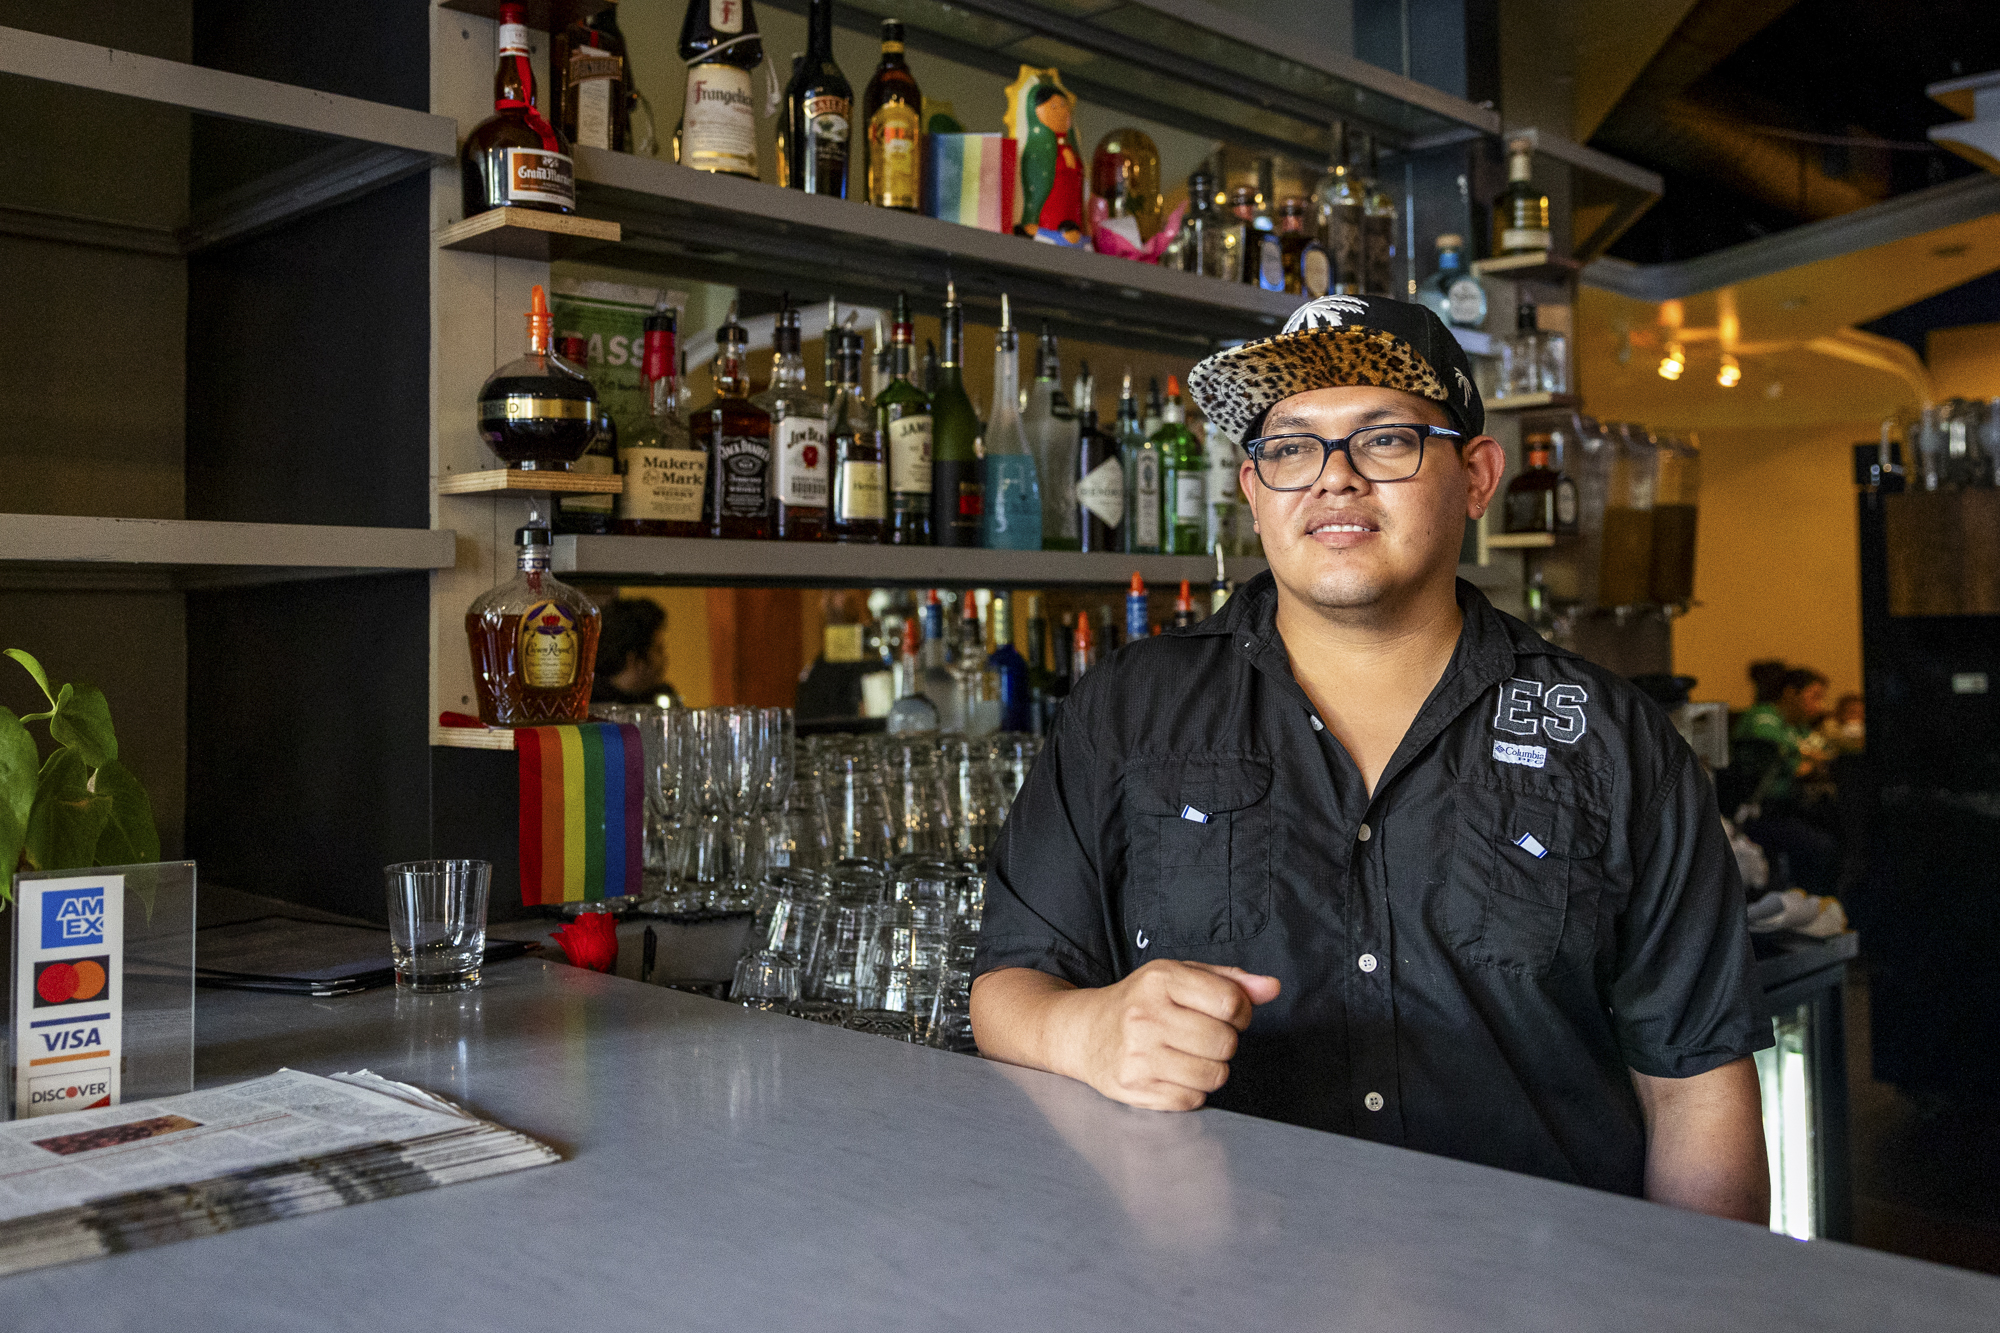 A person wearing a hat stands behind a bar.